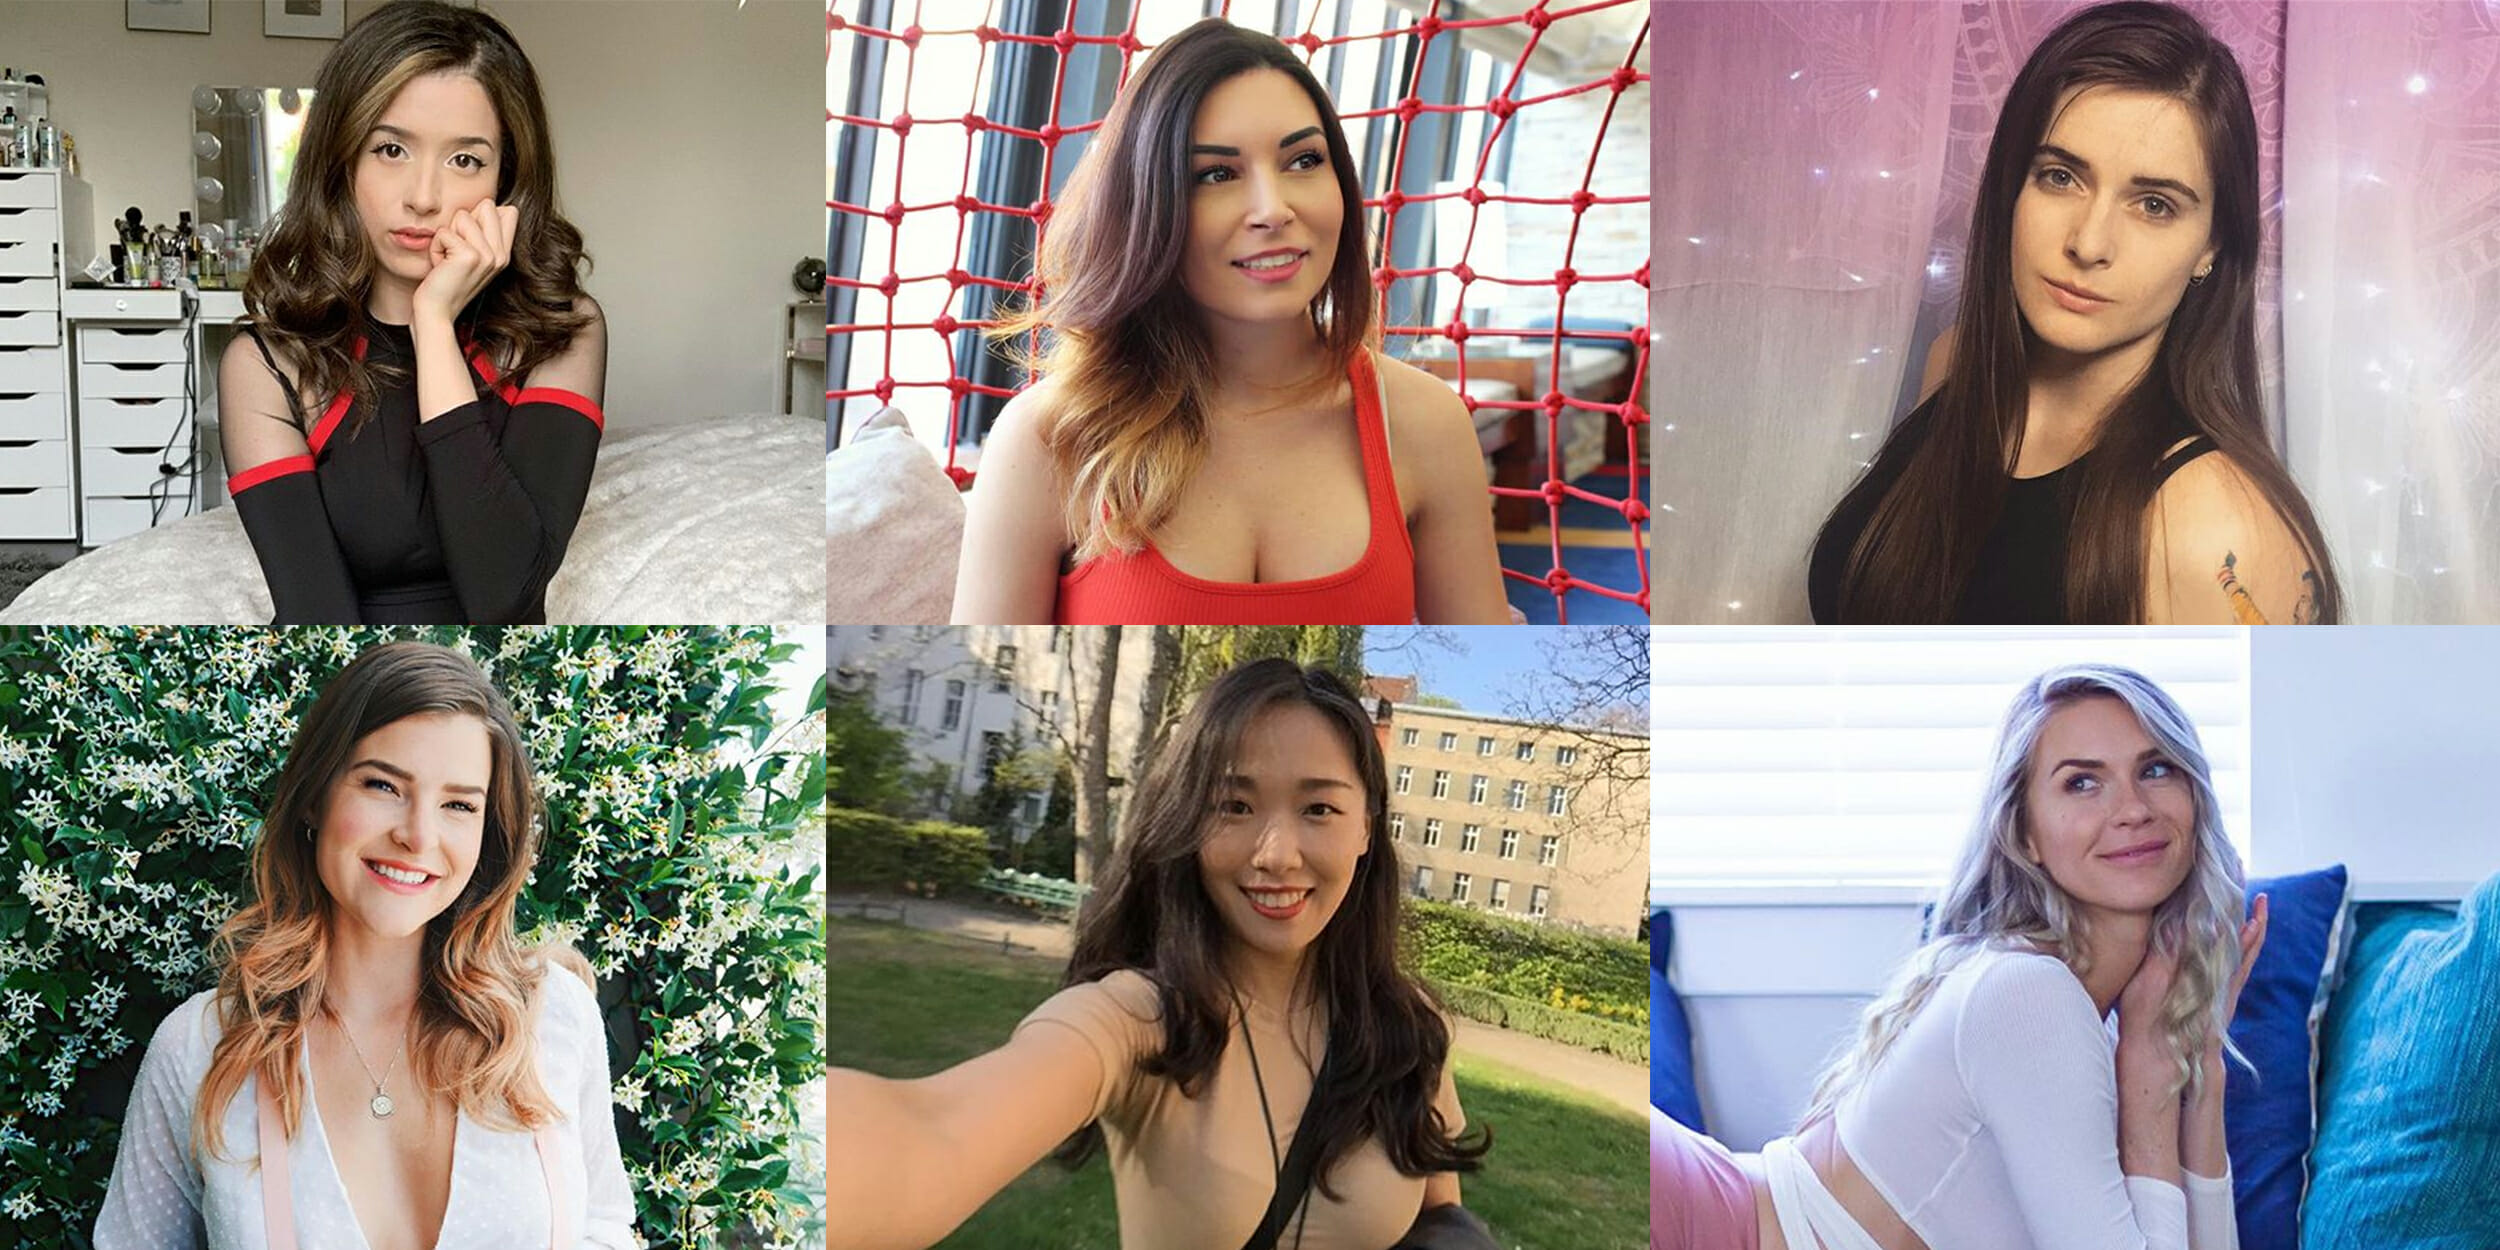 How the Women of Twitch Put Up With the Bullsh*t